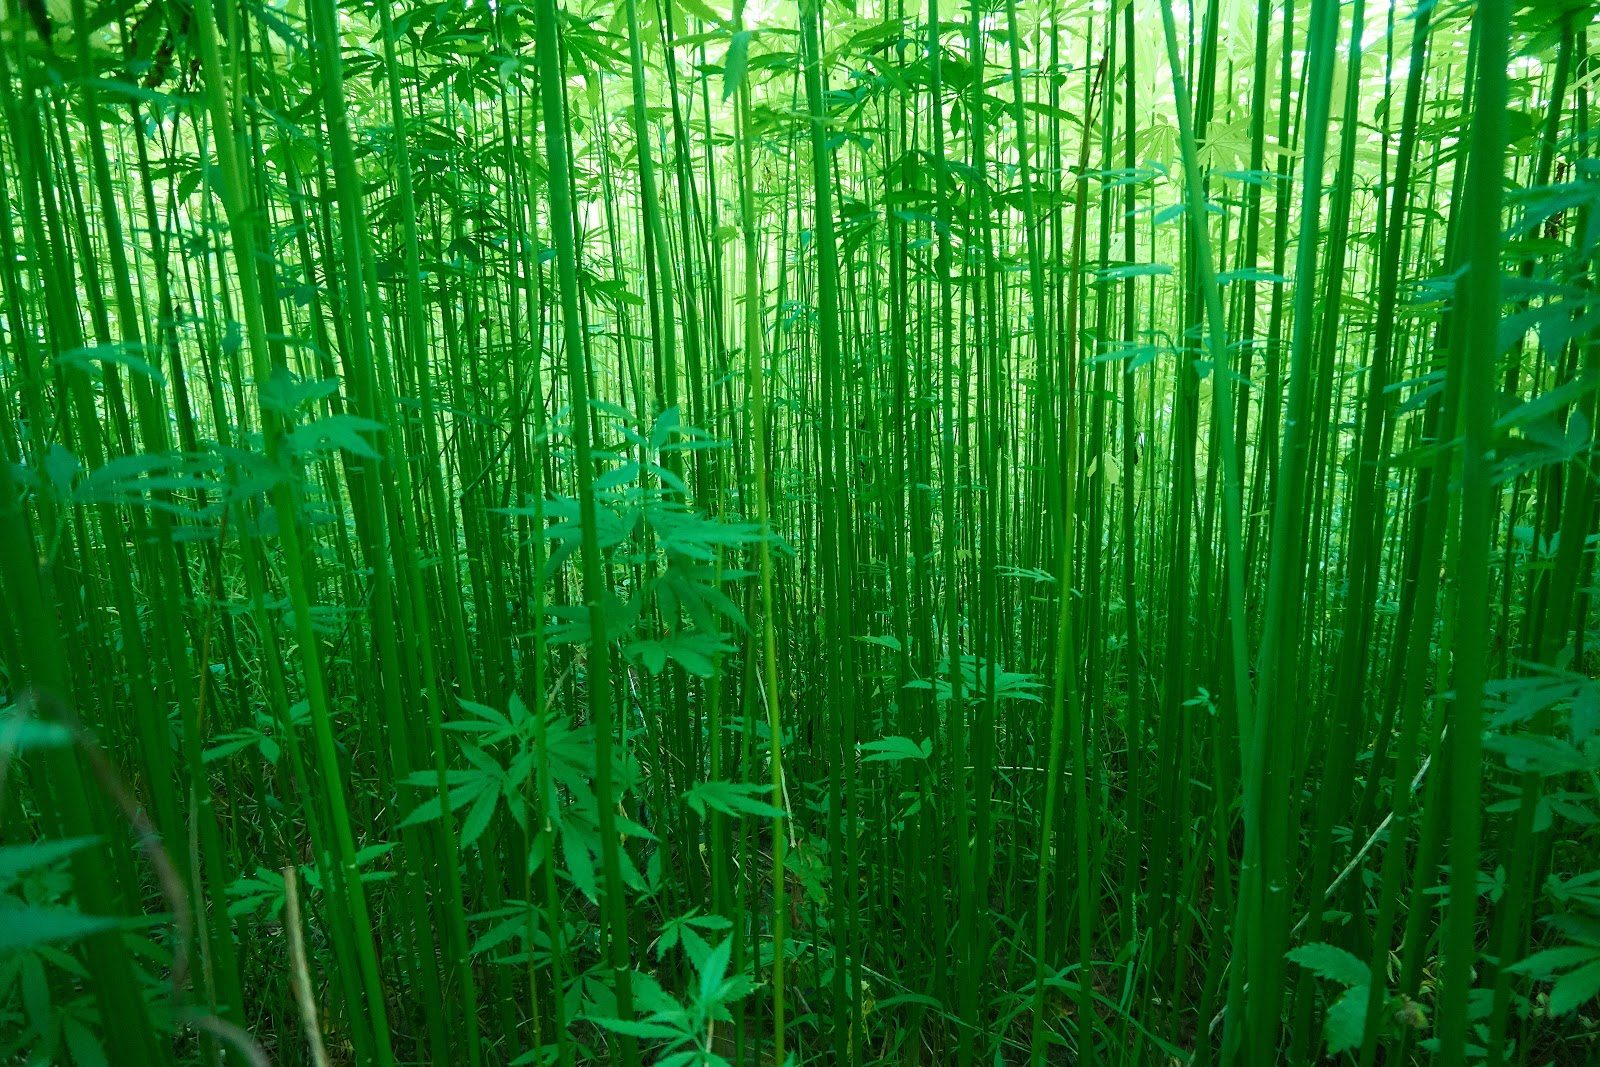 Trump signed the US Farm Bill into law which legalizes hemp